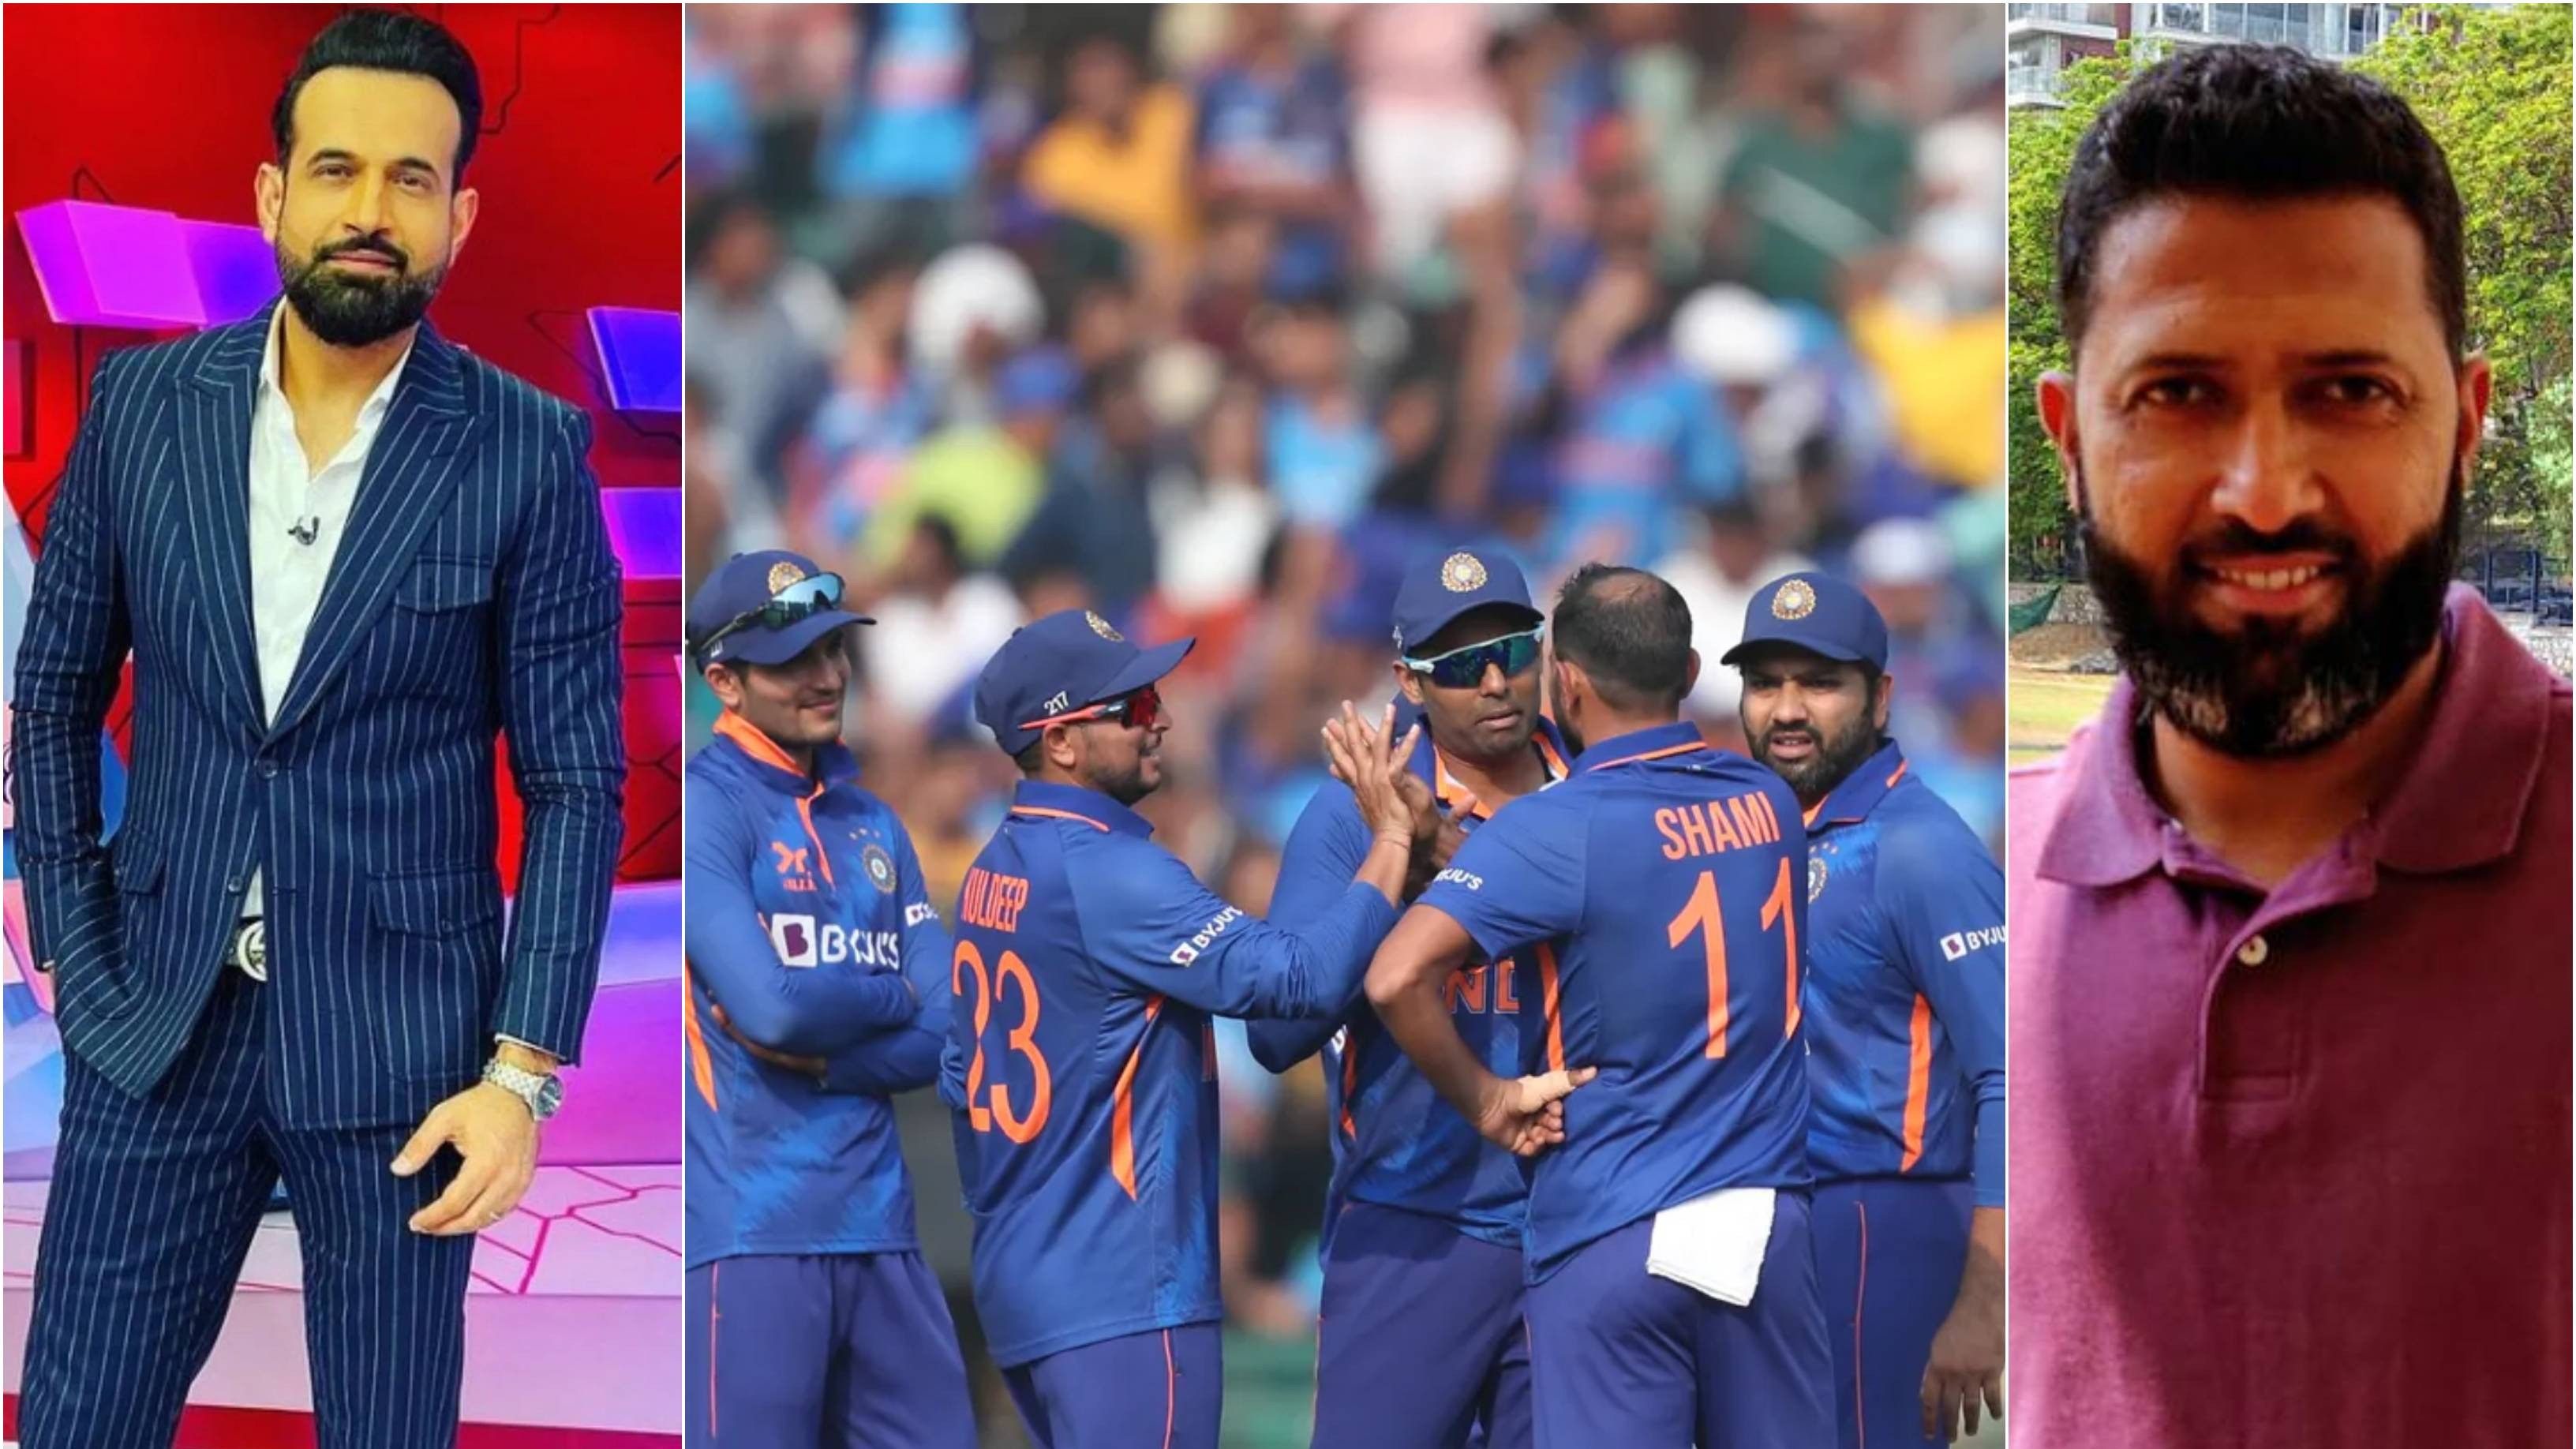 IND v NZ 2023: Cricket fraternity reacts as clinical India rout New Zealand in 2nd ODI to take unassailable series lead